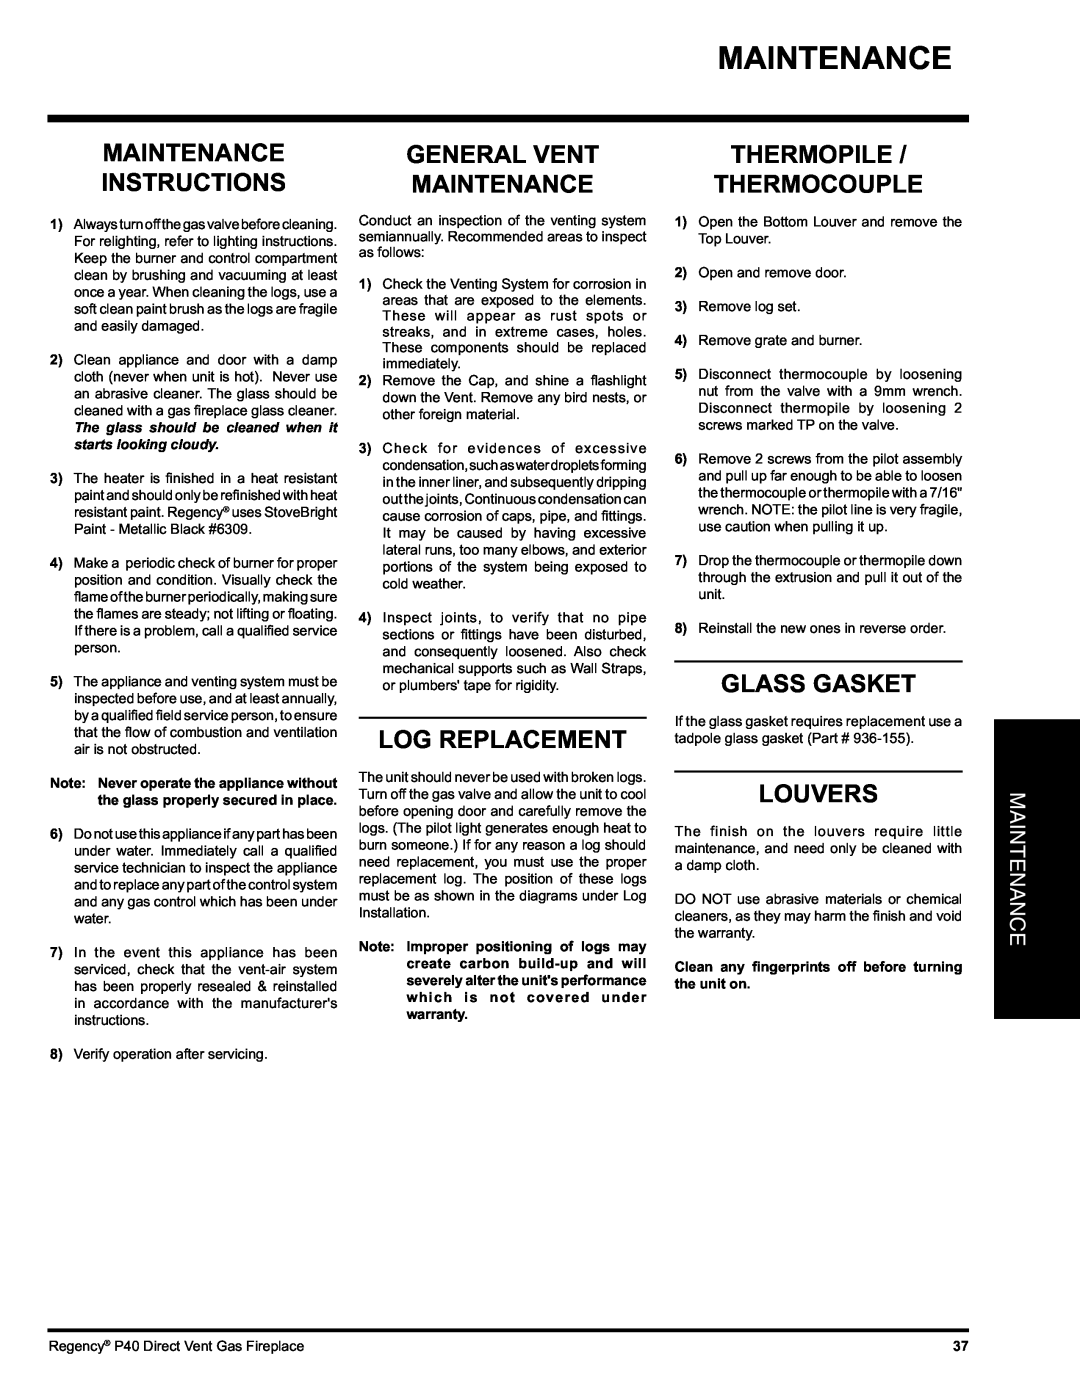 Regency P40-LP Maintenance, Instructions, Thermopile Thermocouple, Log Replacement, Glass Gasket, Louvers, General Vent 